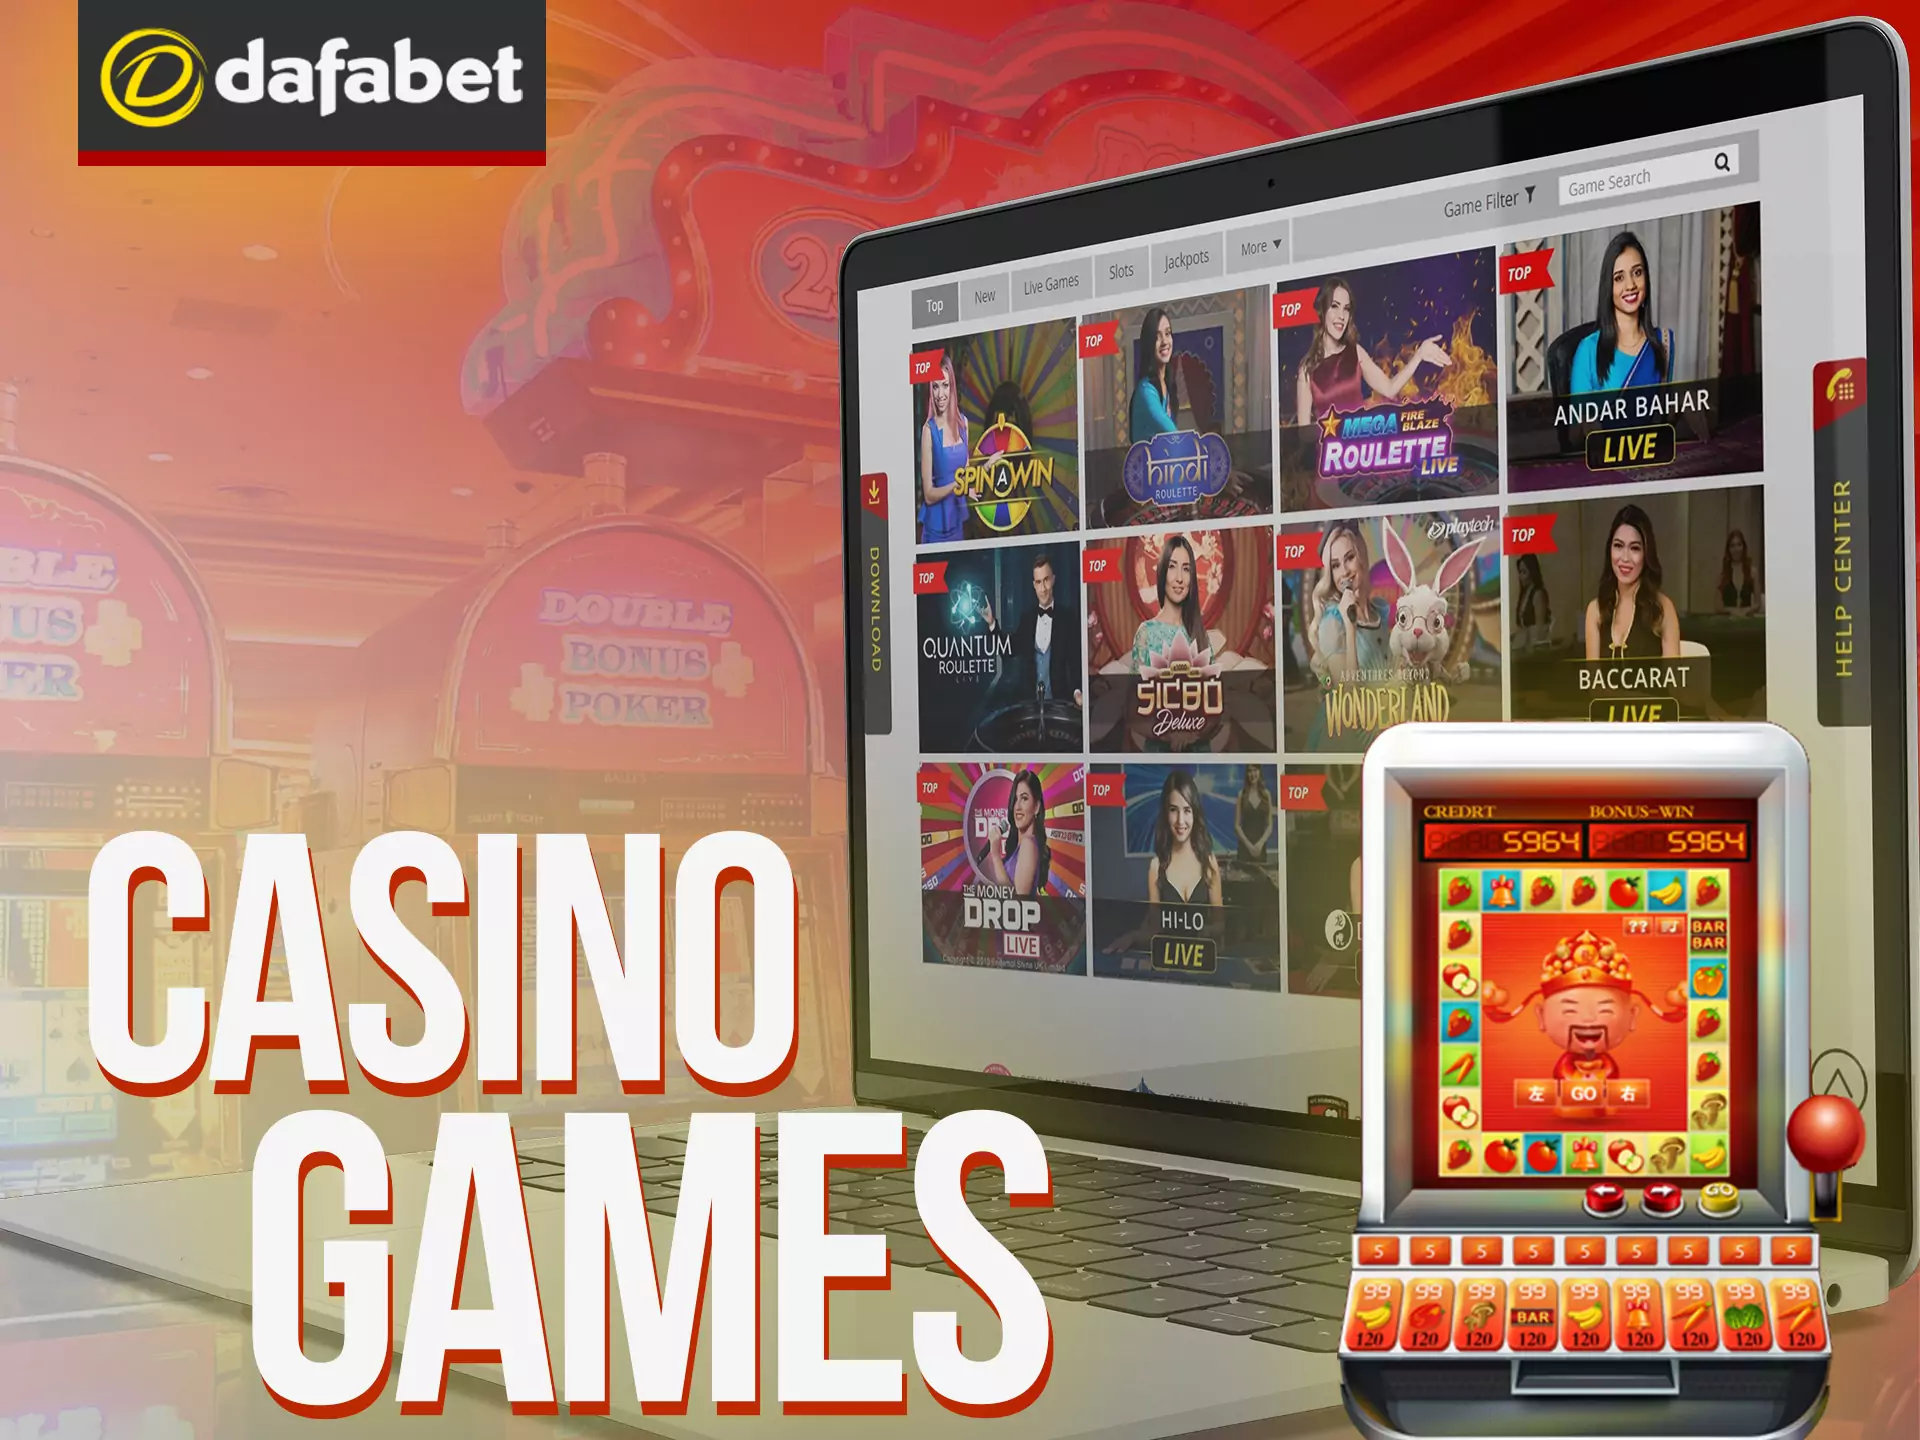 Play a variety of casino games at Dafabet.